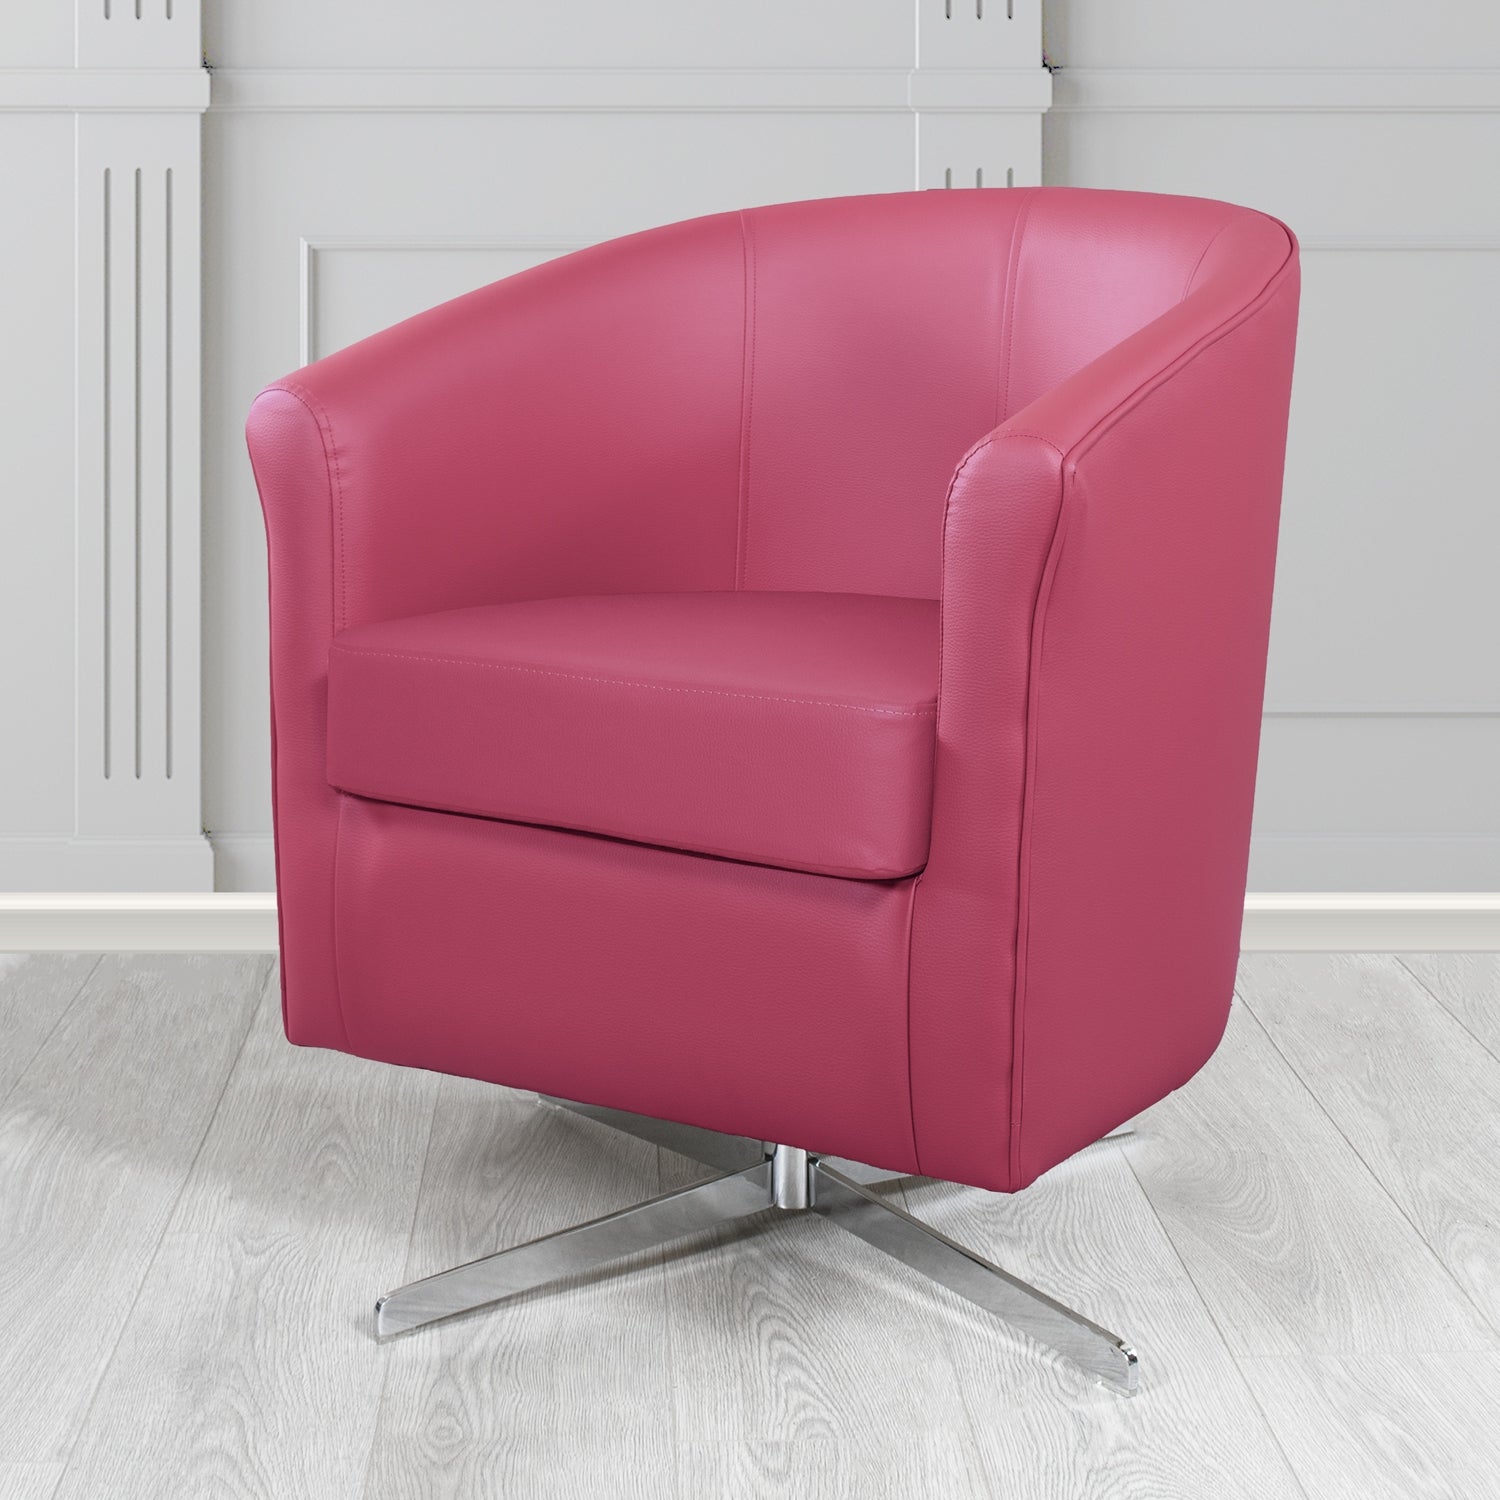 Cannes Swivel Tub Chair in Just Colour Deep Rose Crib 5 Faux Leather